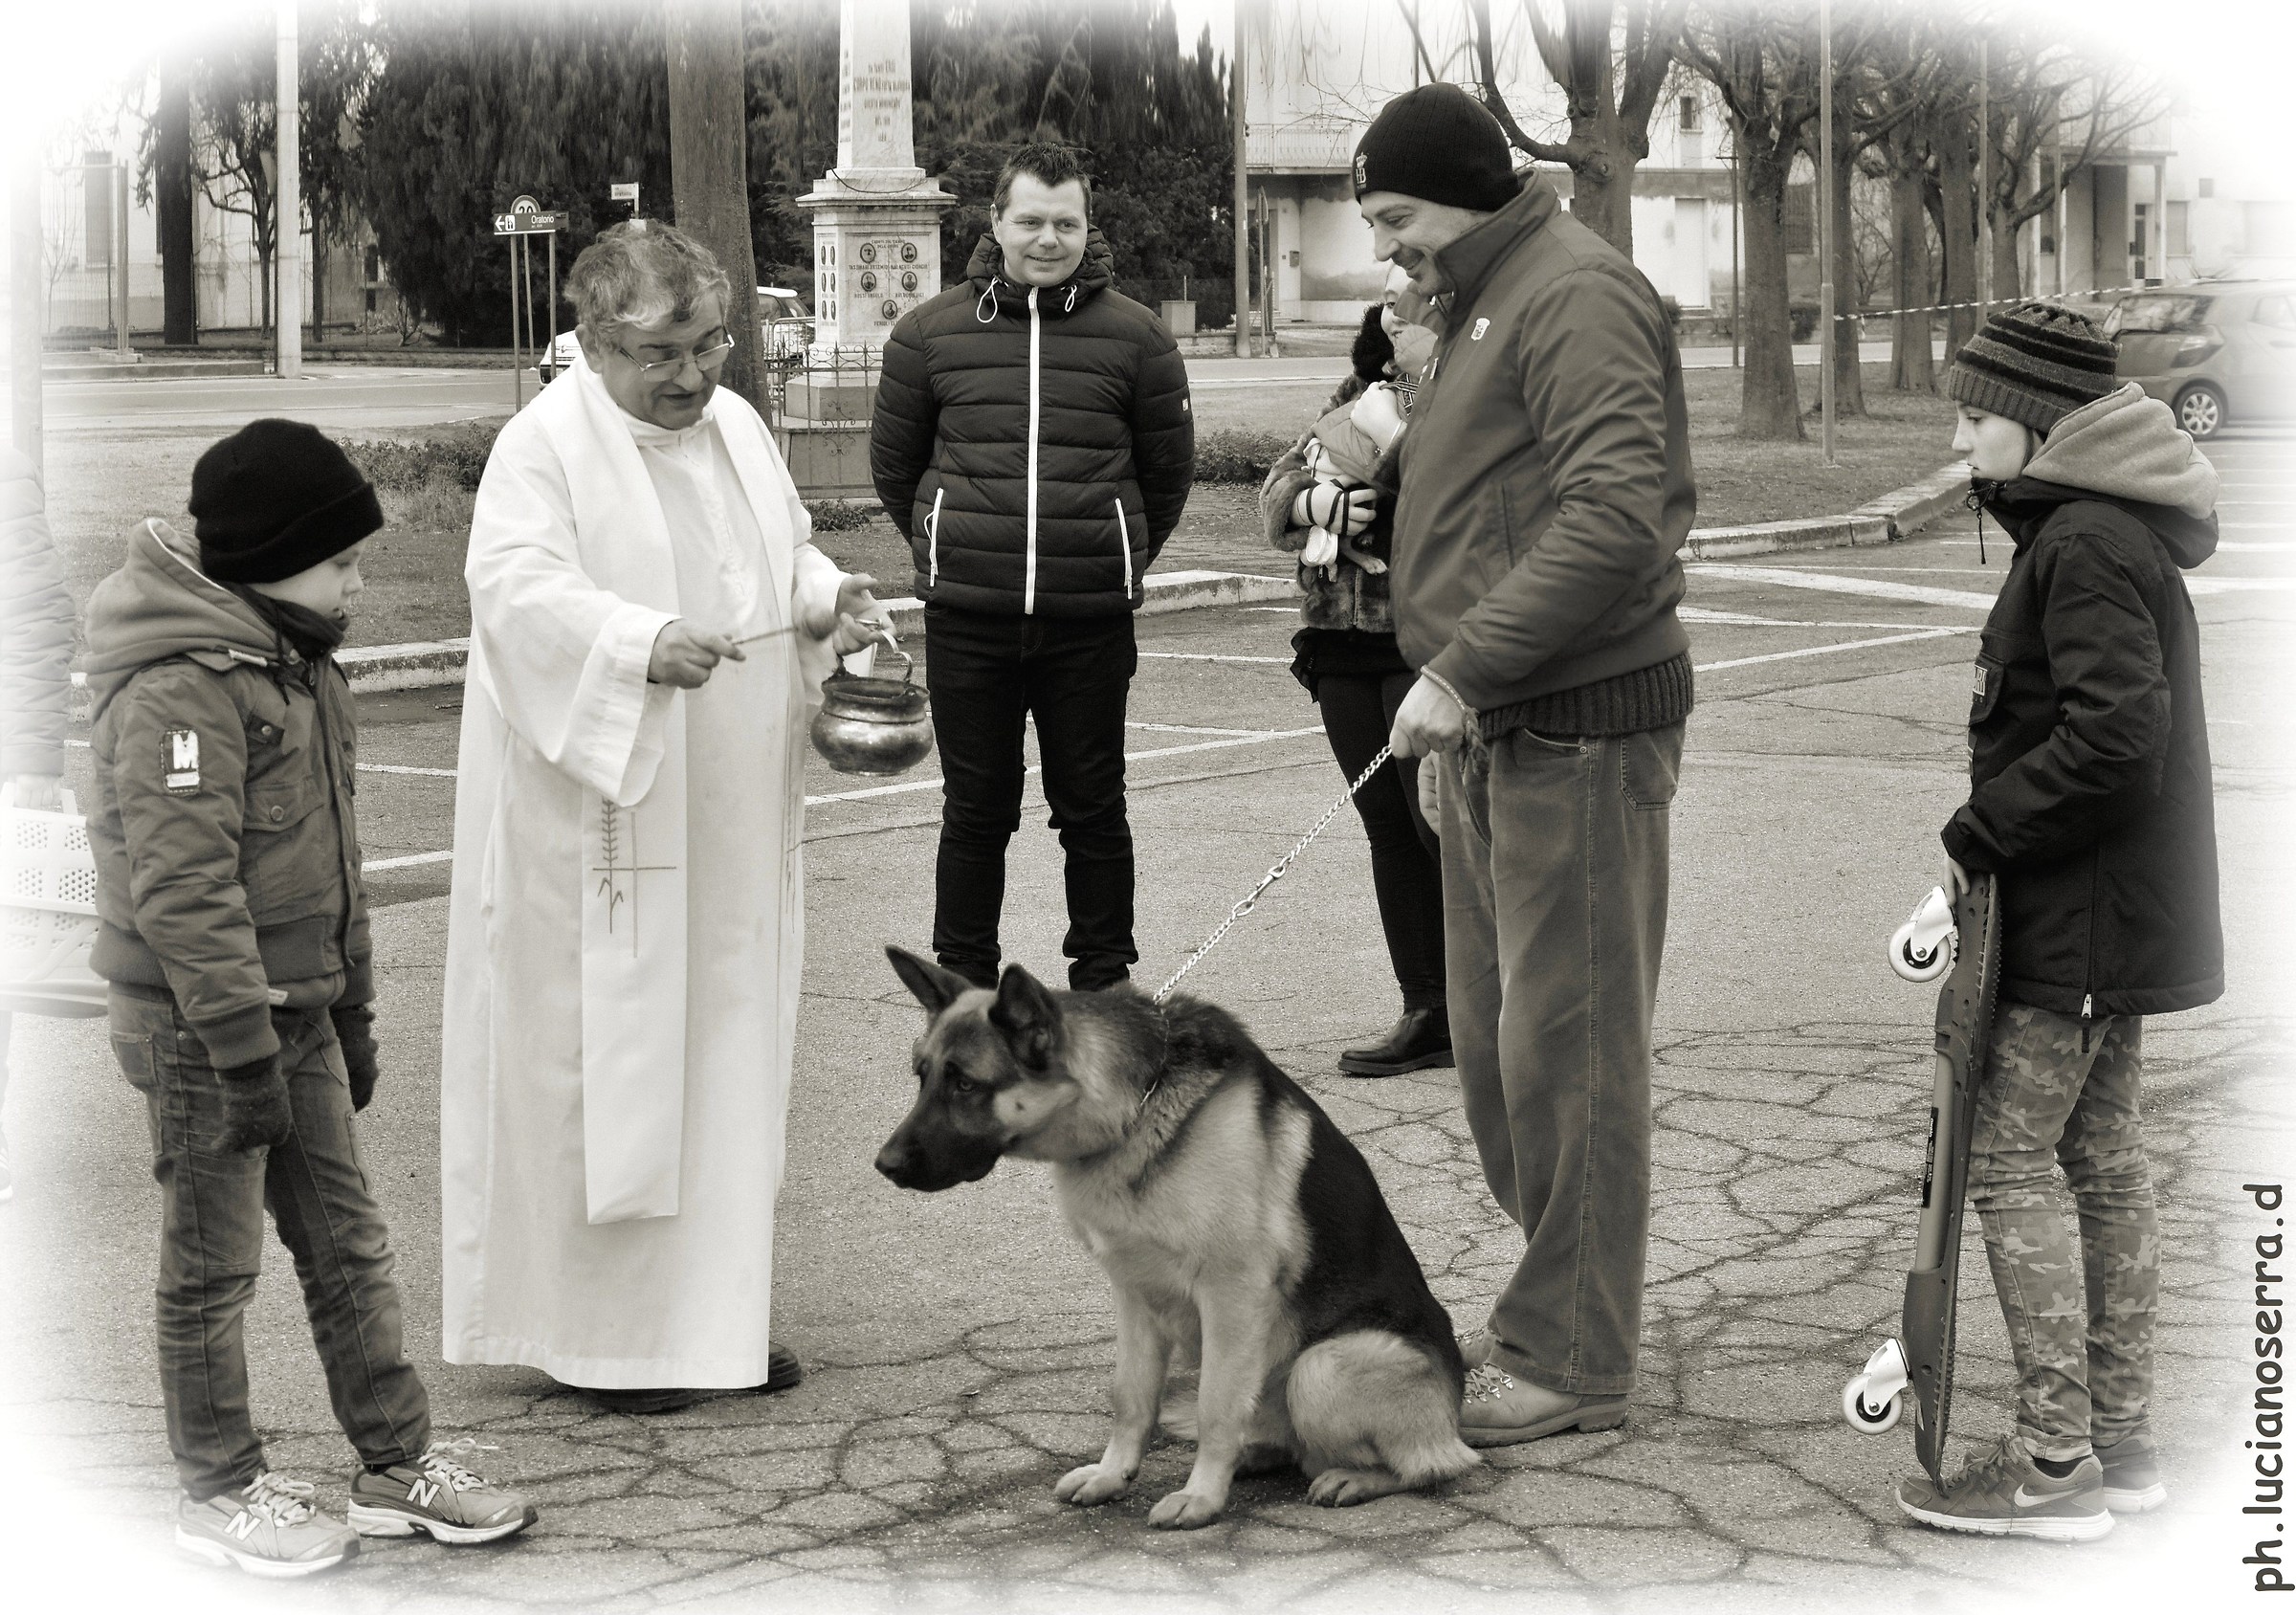 Blessing of the animals...